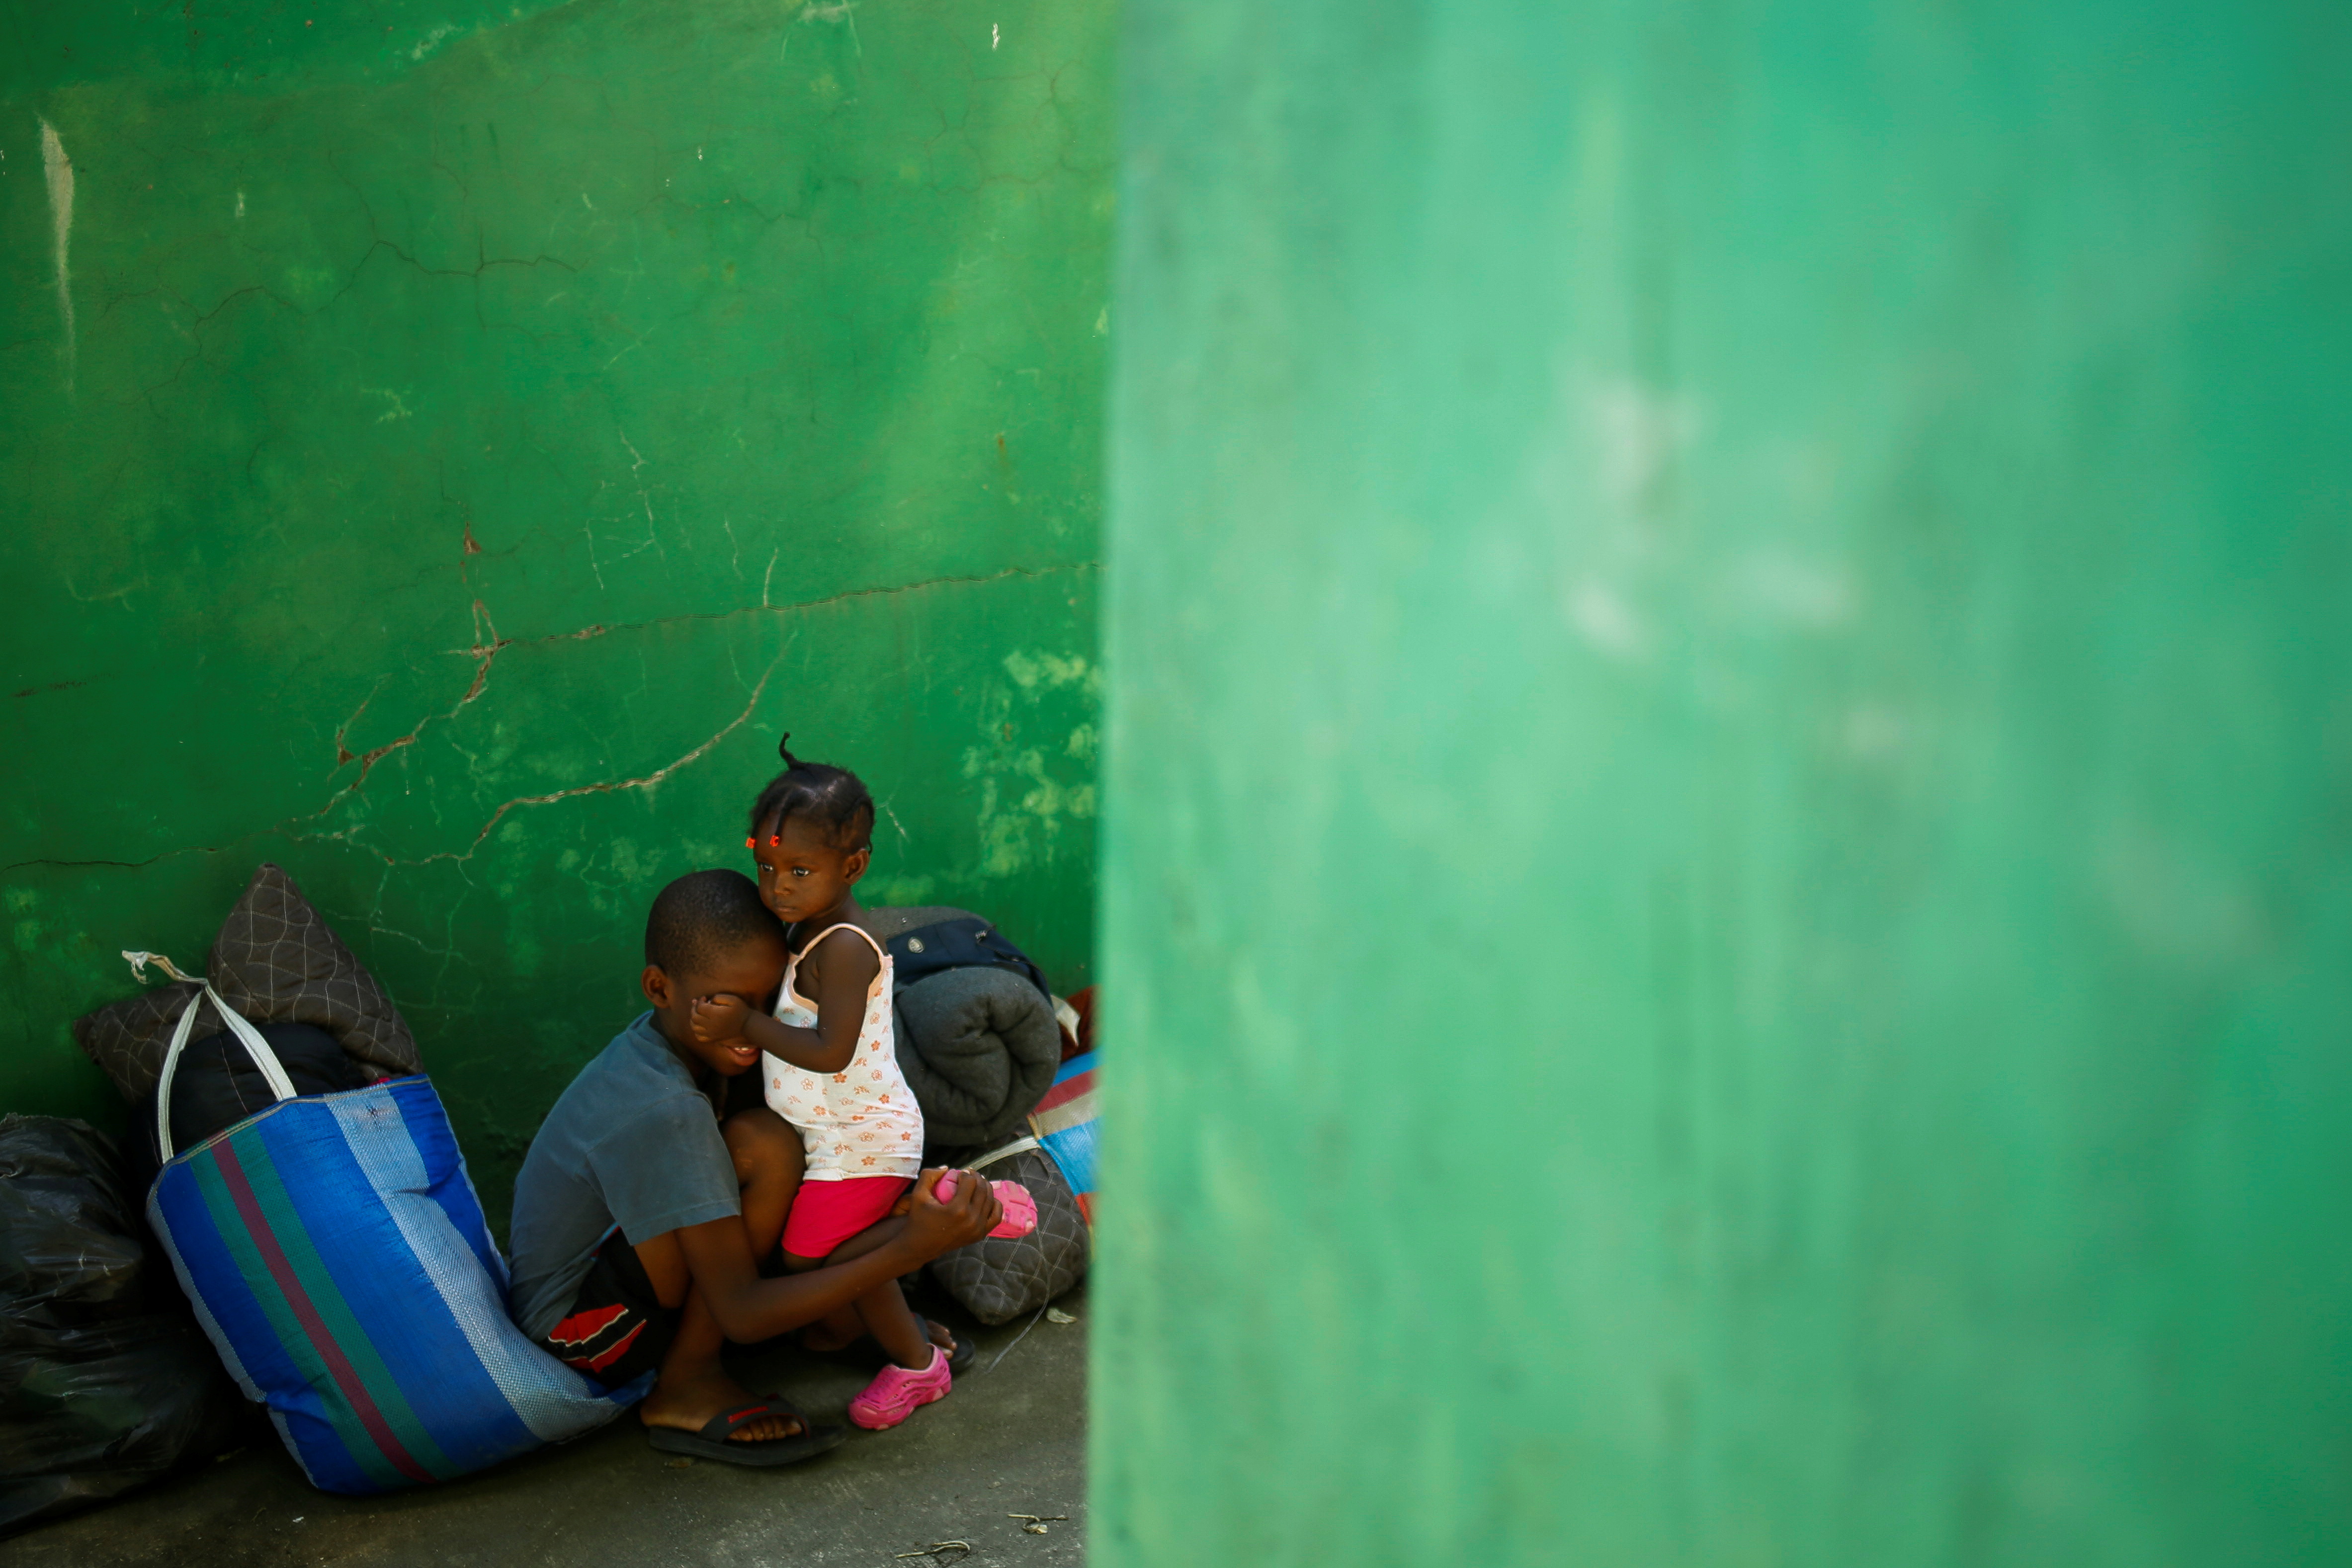 Migrants wait as they hope to obtain humanitarian visas to transit Mexican territory, in Tapachula